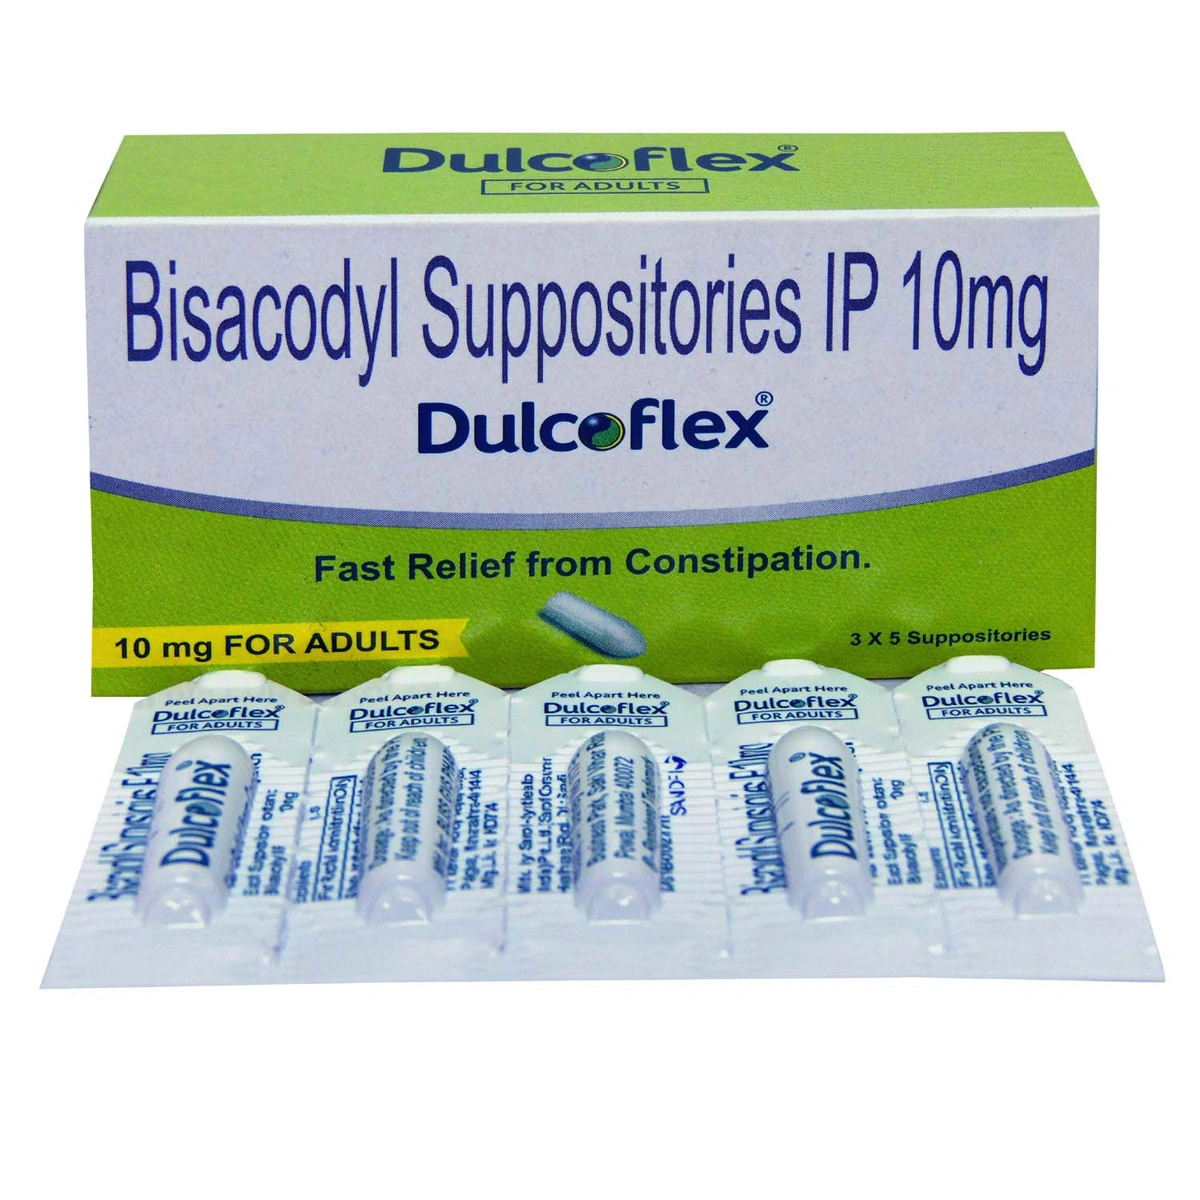 Dulcoflex Bisacodyl Suppositories IP 10mg for Adults | Provides Fast Relief from Constipation